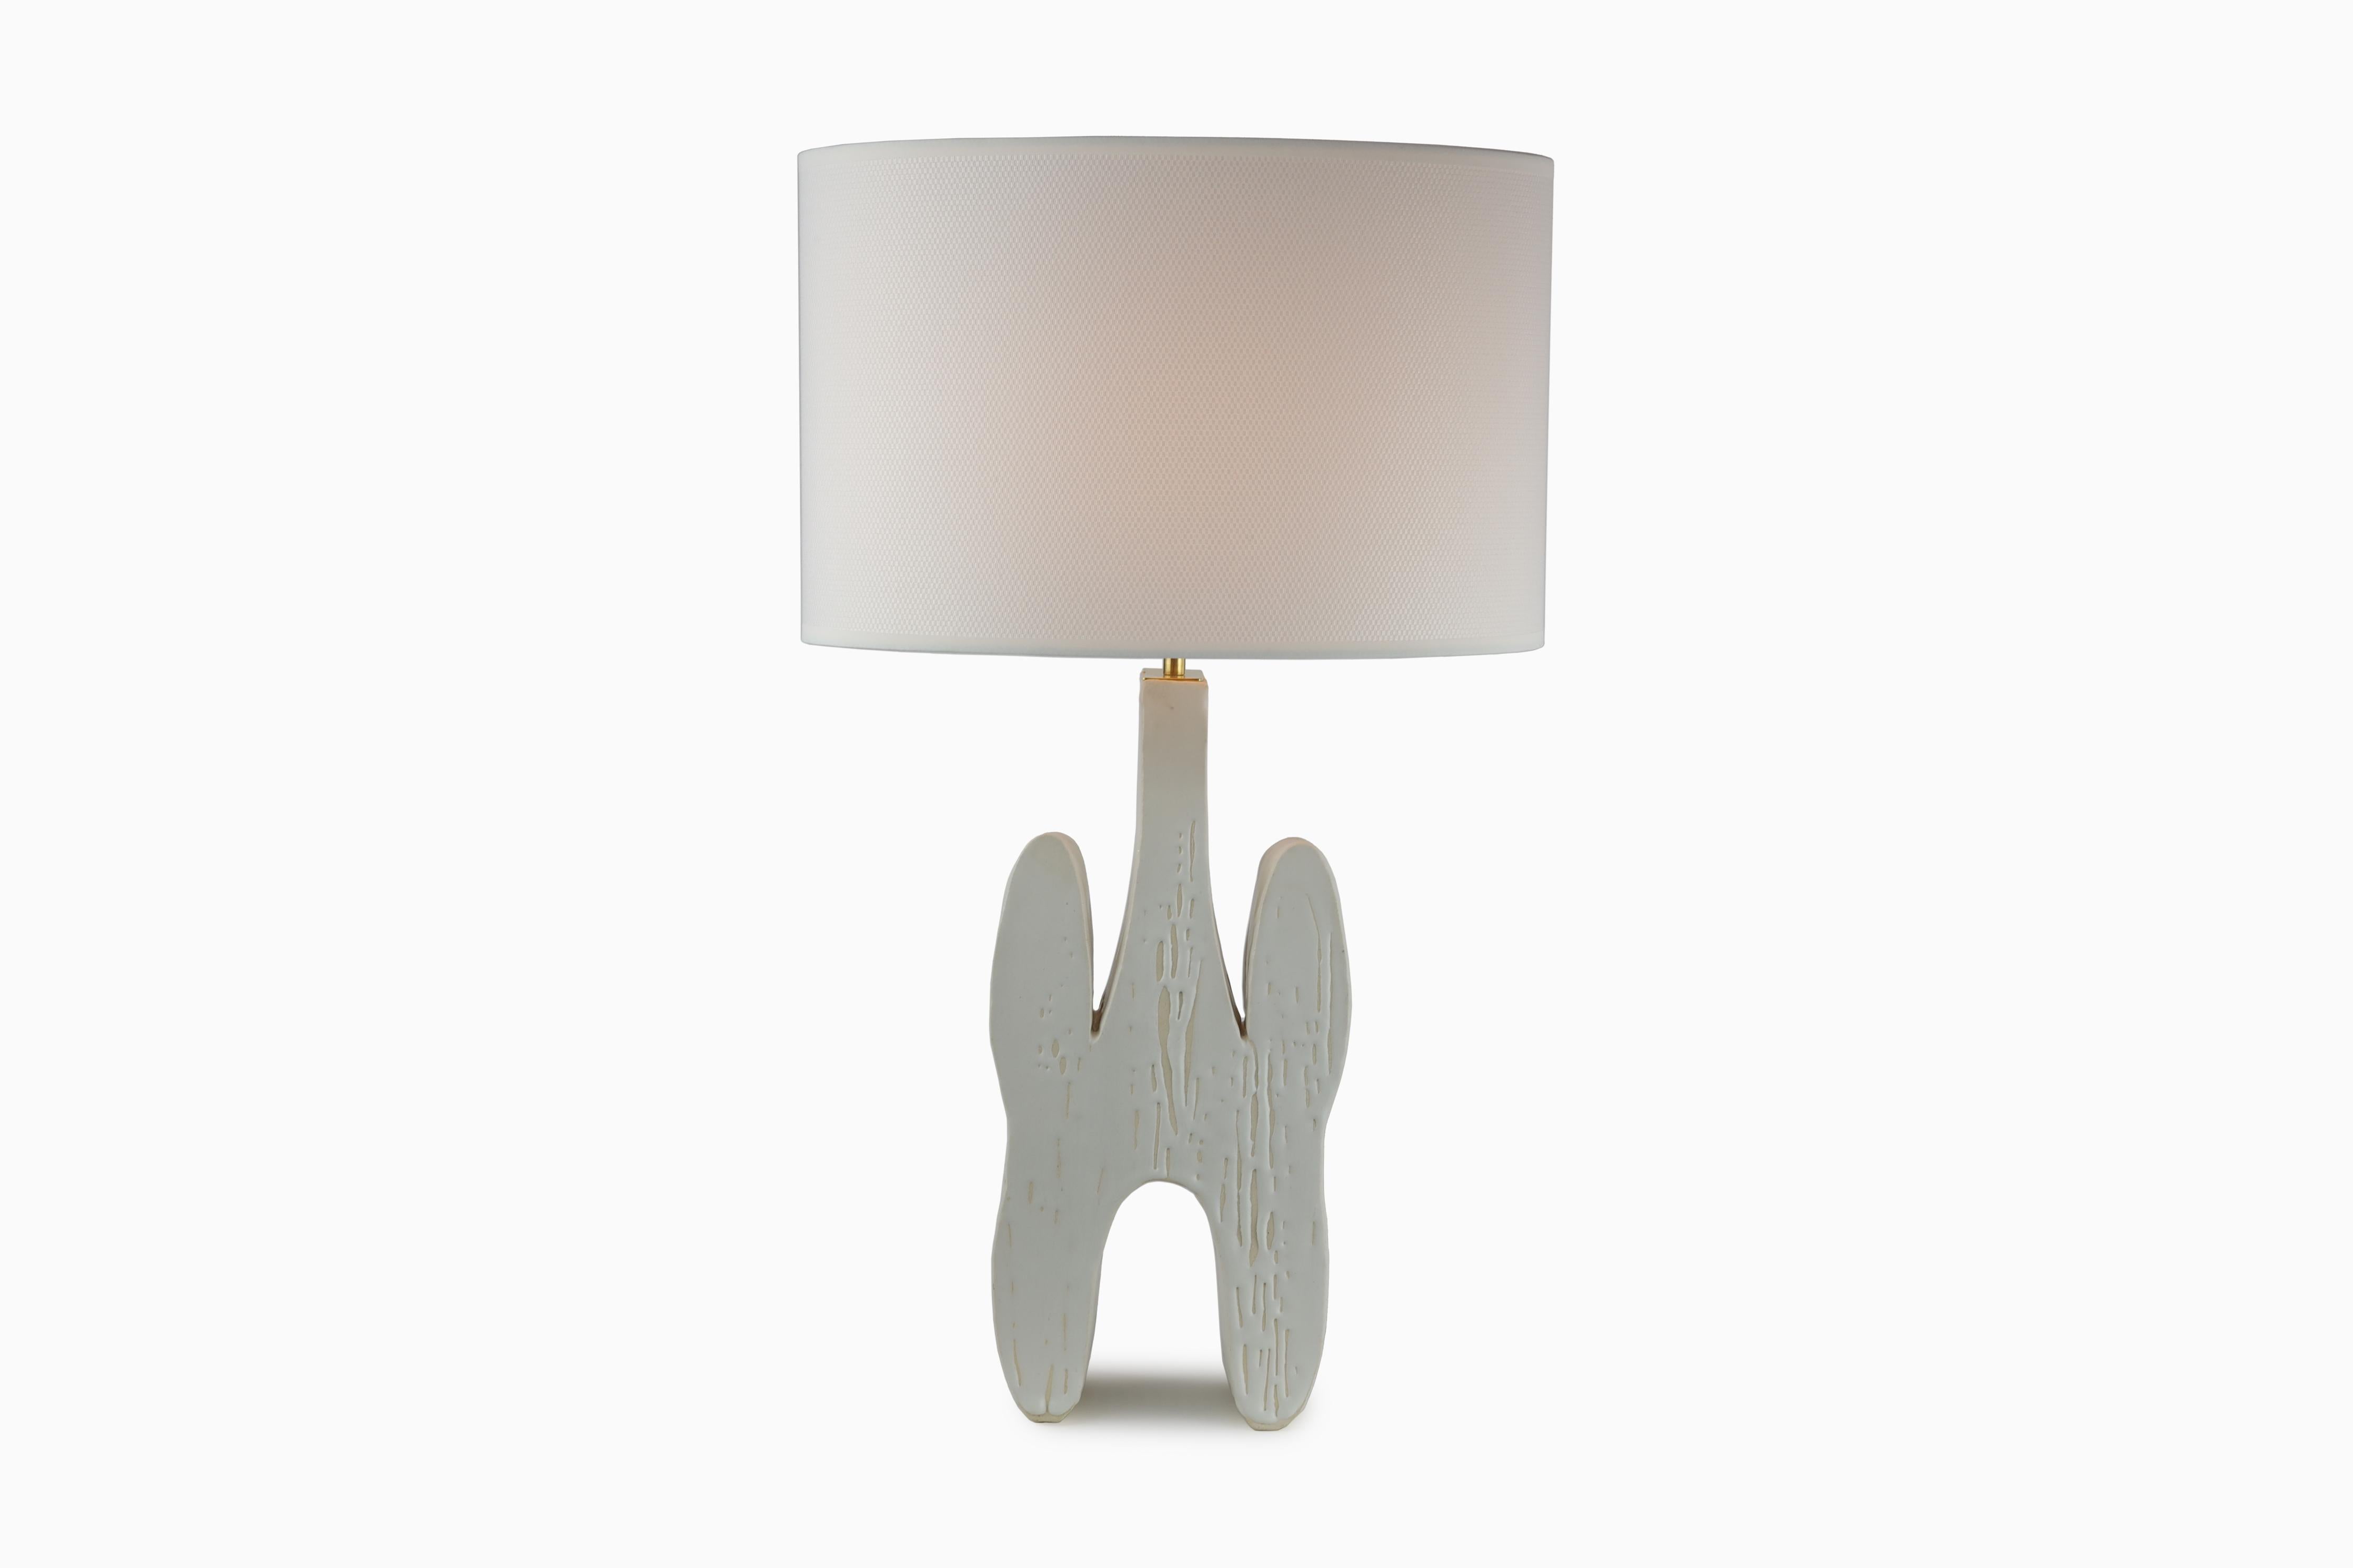 The Inkblot Table Lamp is designed from an actual inkblot, giving it a symmetrical shape. The body of the lamp is hand sculpted clay. Each lamps glaze will vary and be unique because of the organic process. The Inkblot Table Lamp would be a great